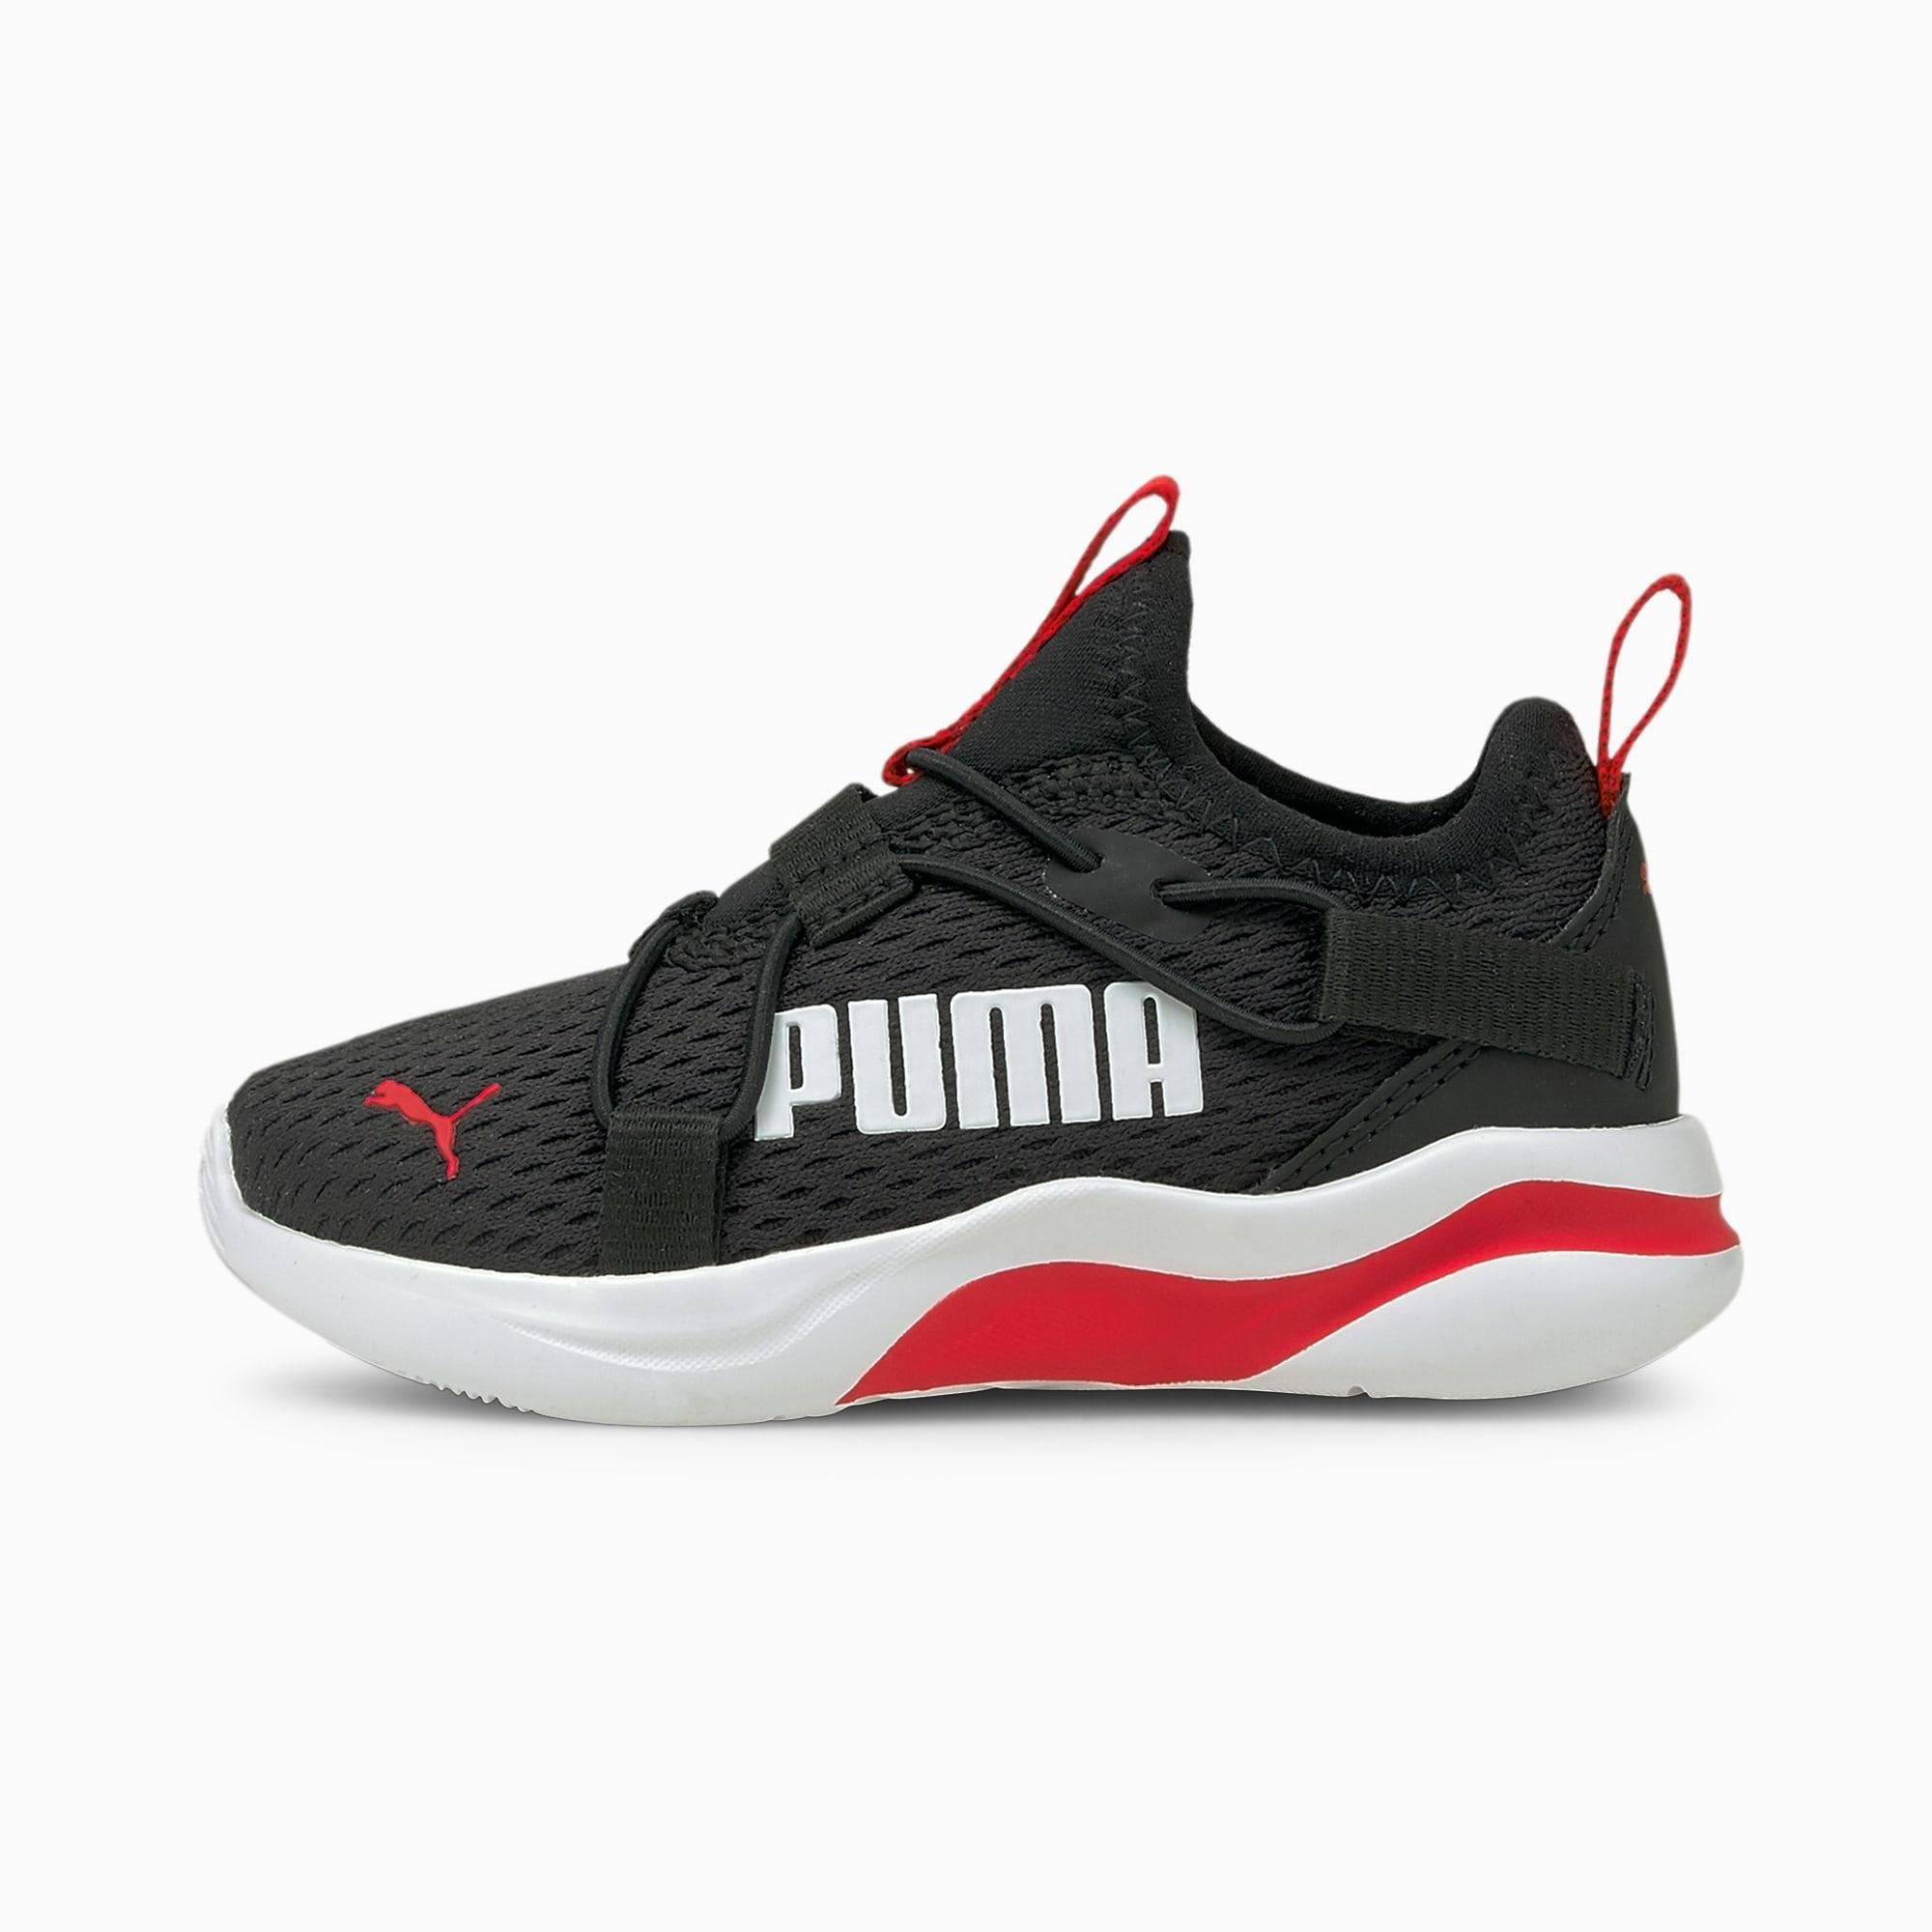 Rift Pop Toddler Slip-On Shoes by PUMA